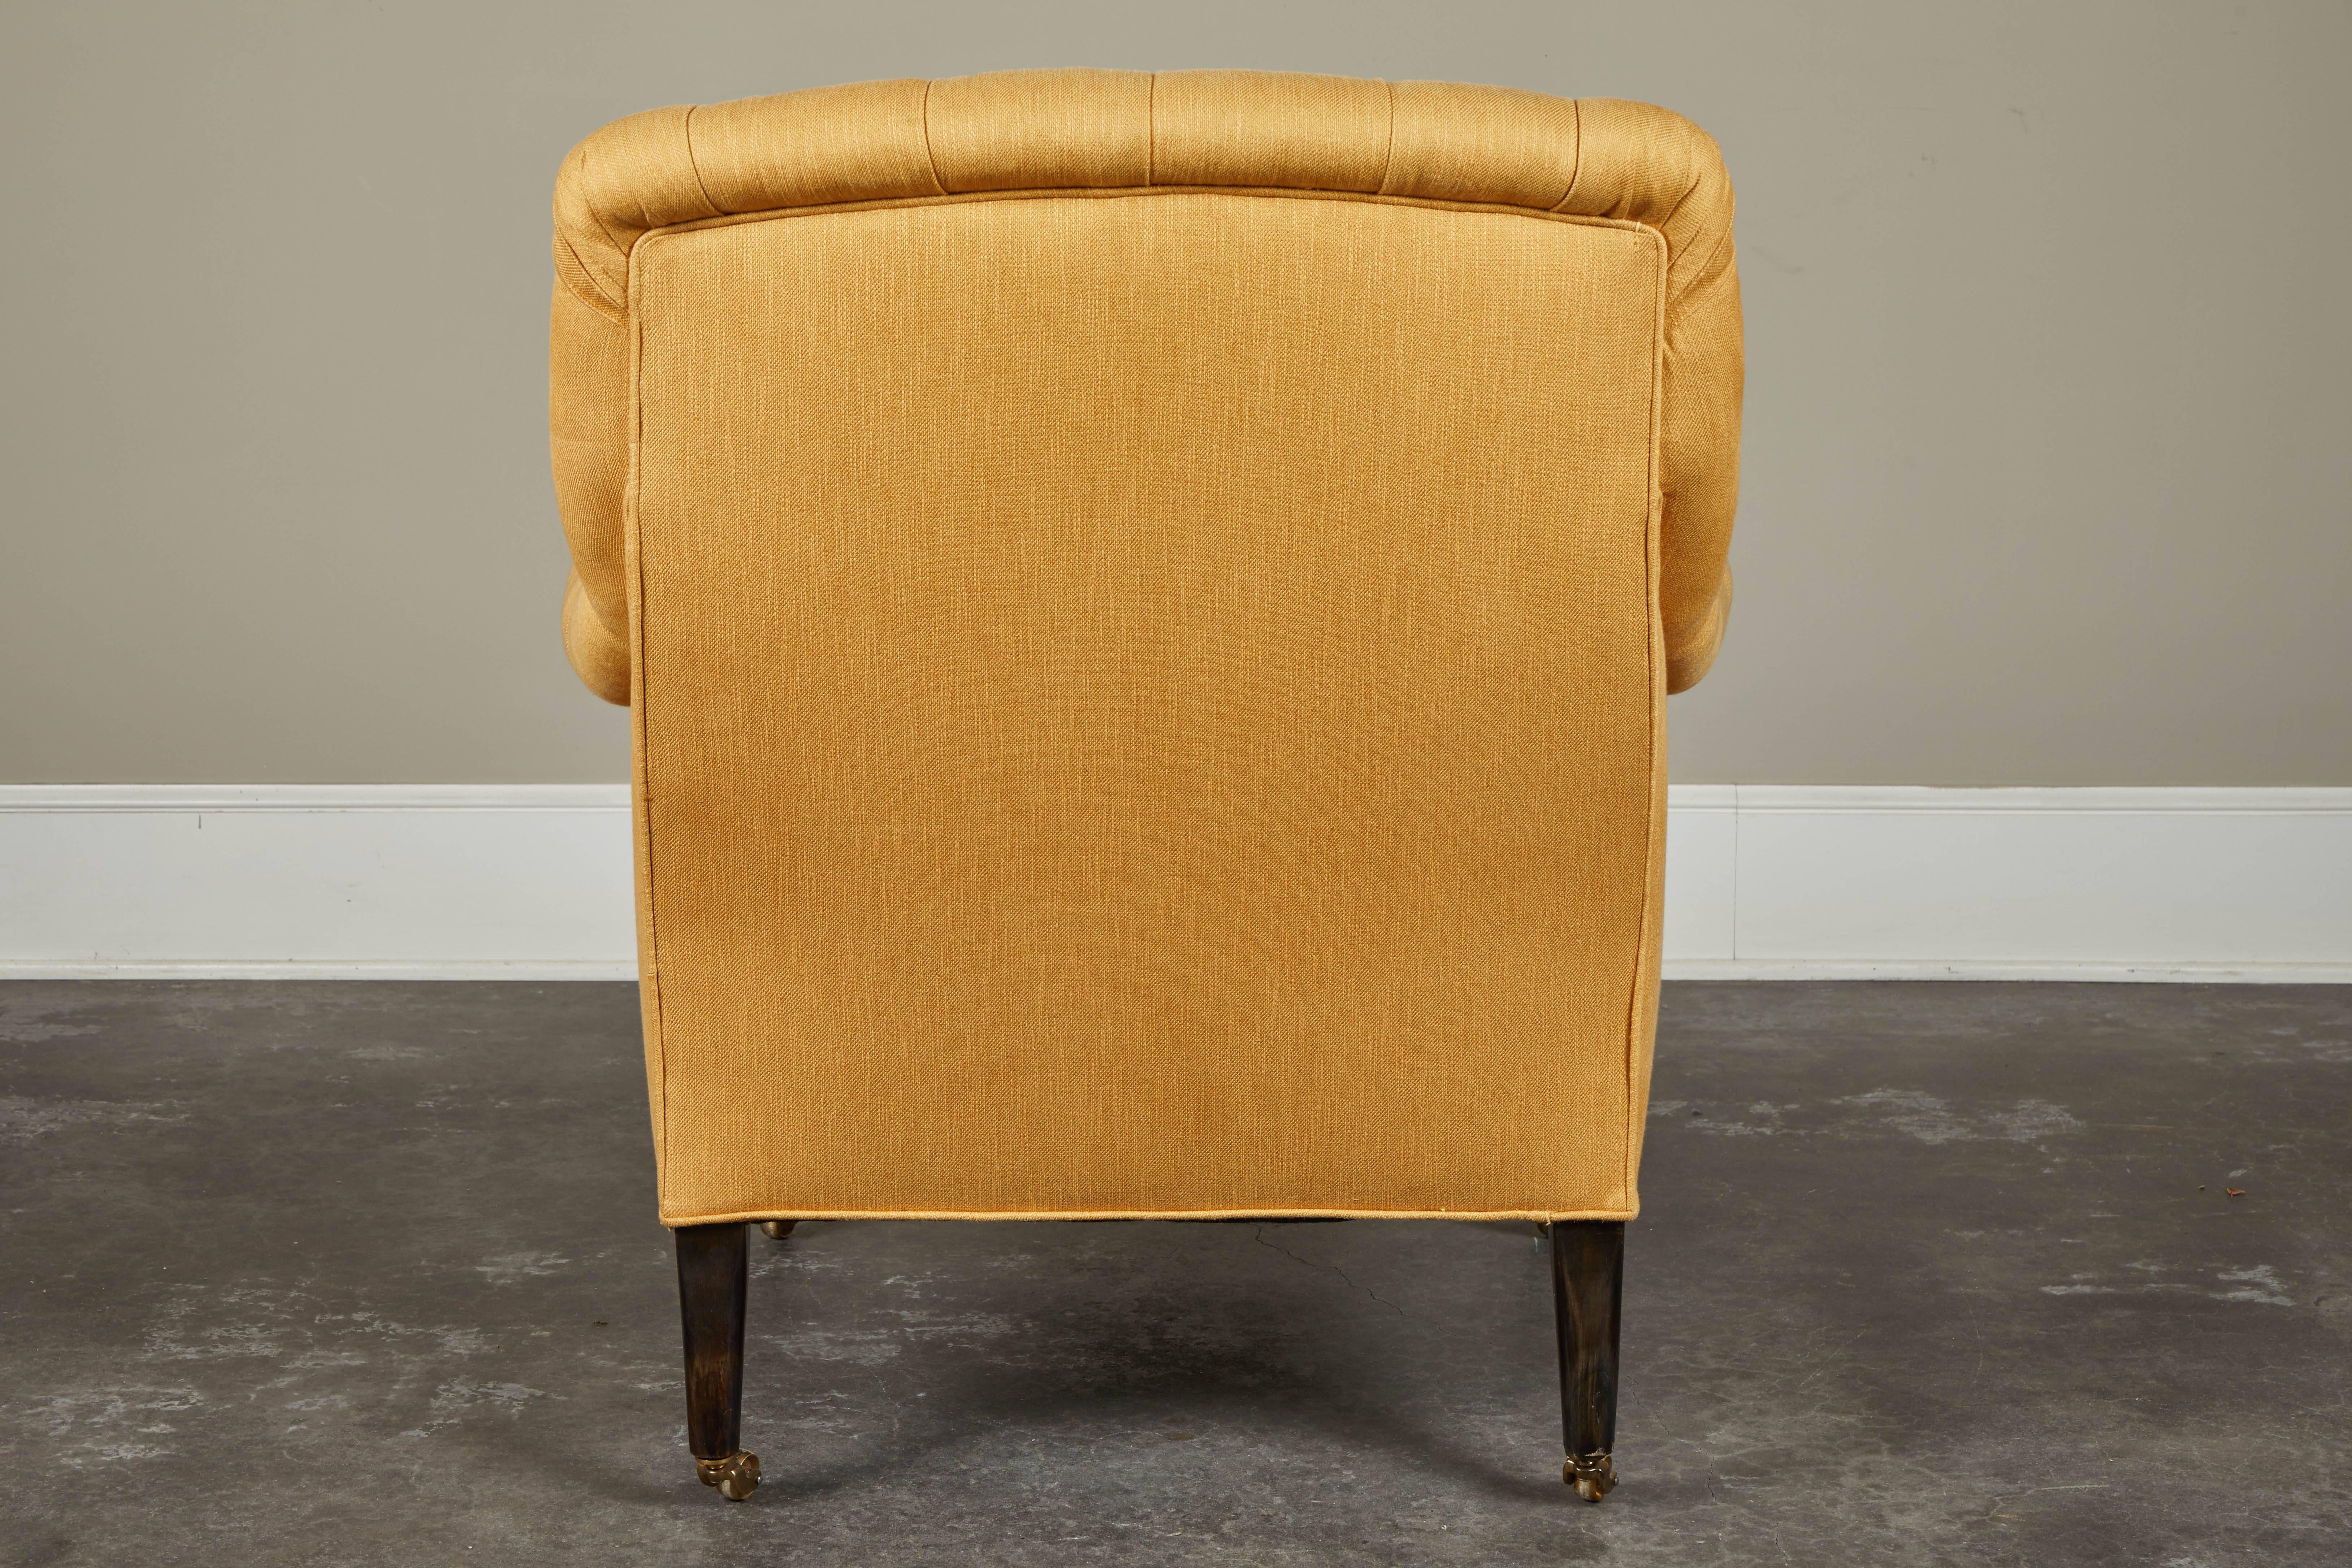 Tufted Upholstered Club Chair on Casters, Susanne Hollis Collection 1